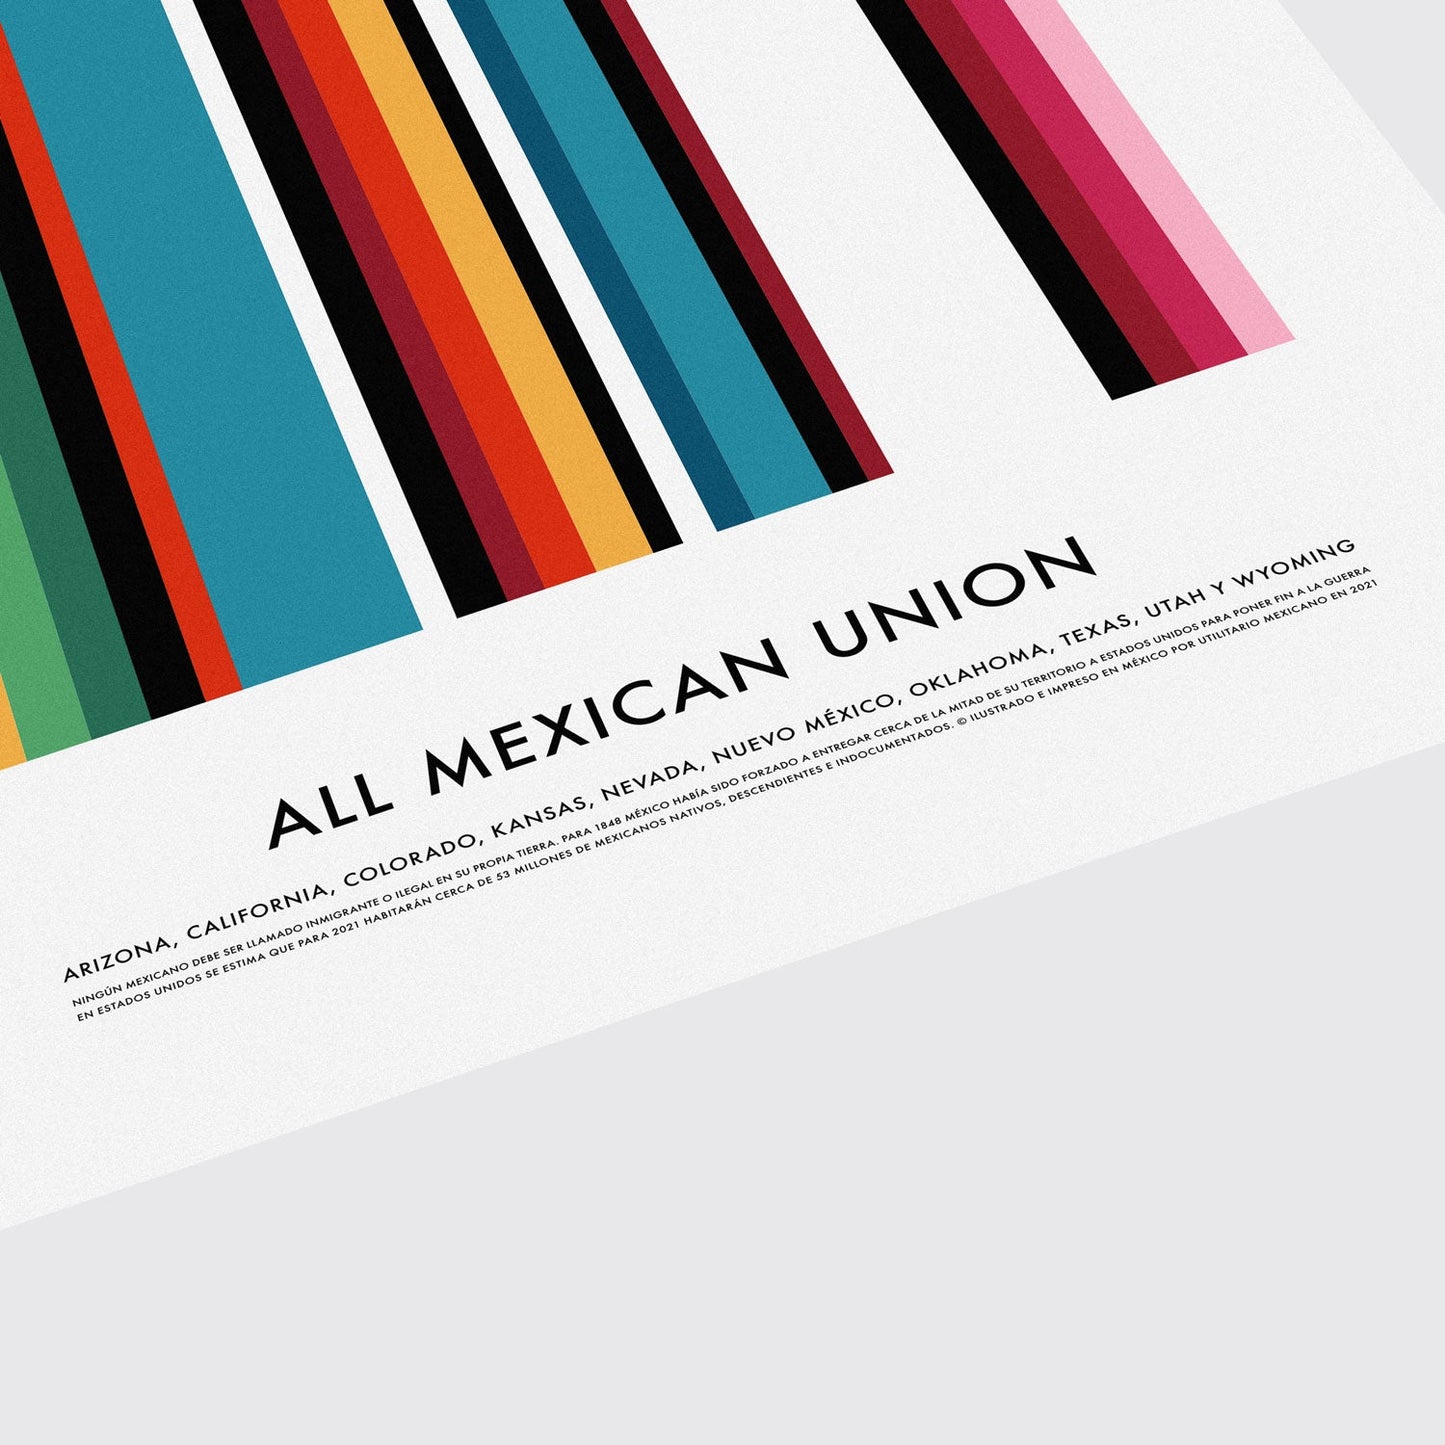 ALL MEXICAN UNION / POSTER